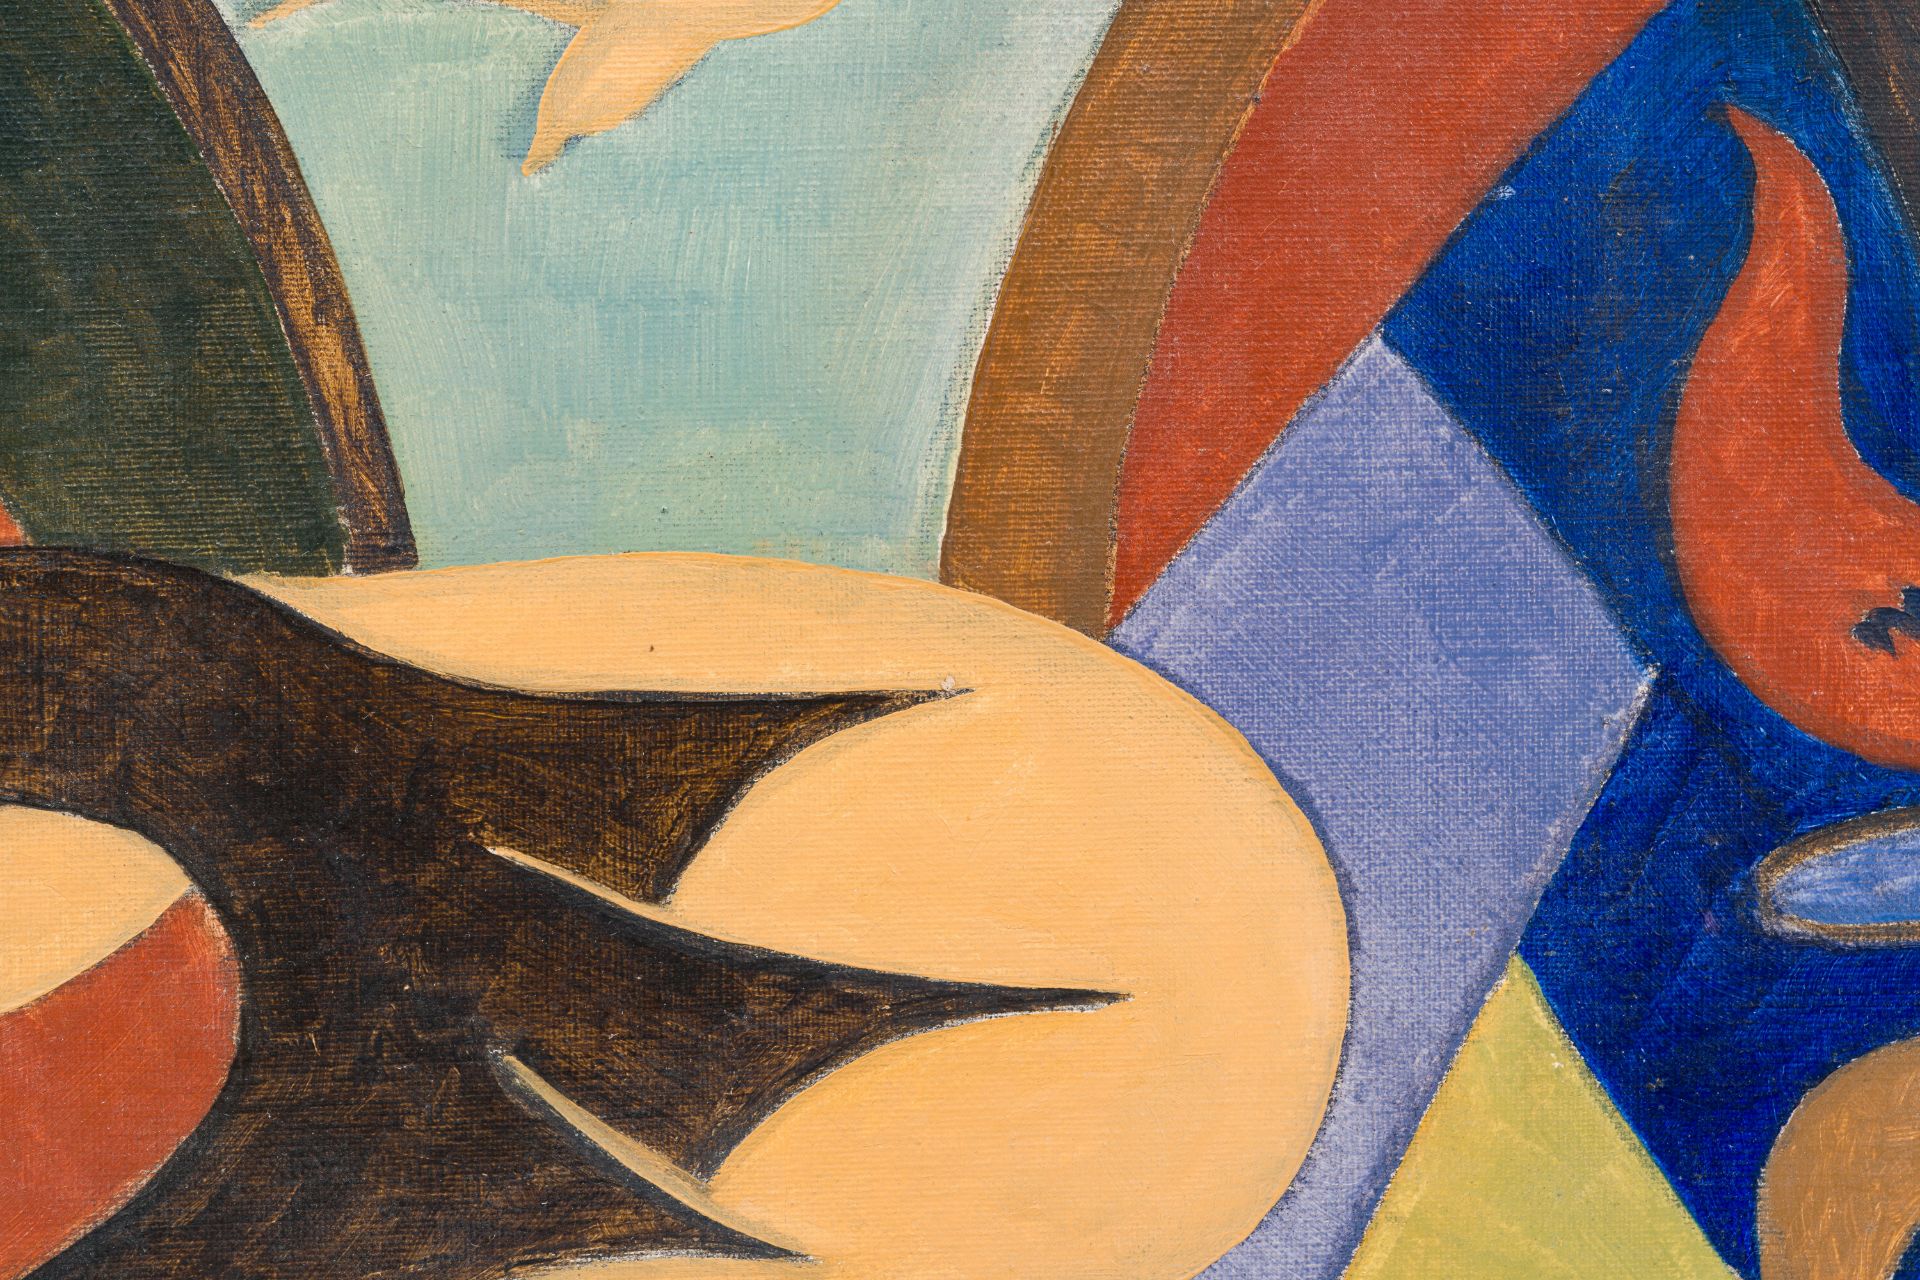 L. Delaunay (?): Abstract composition, oil on canvas, 20th C. - Image 5 of 5